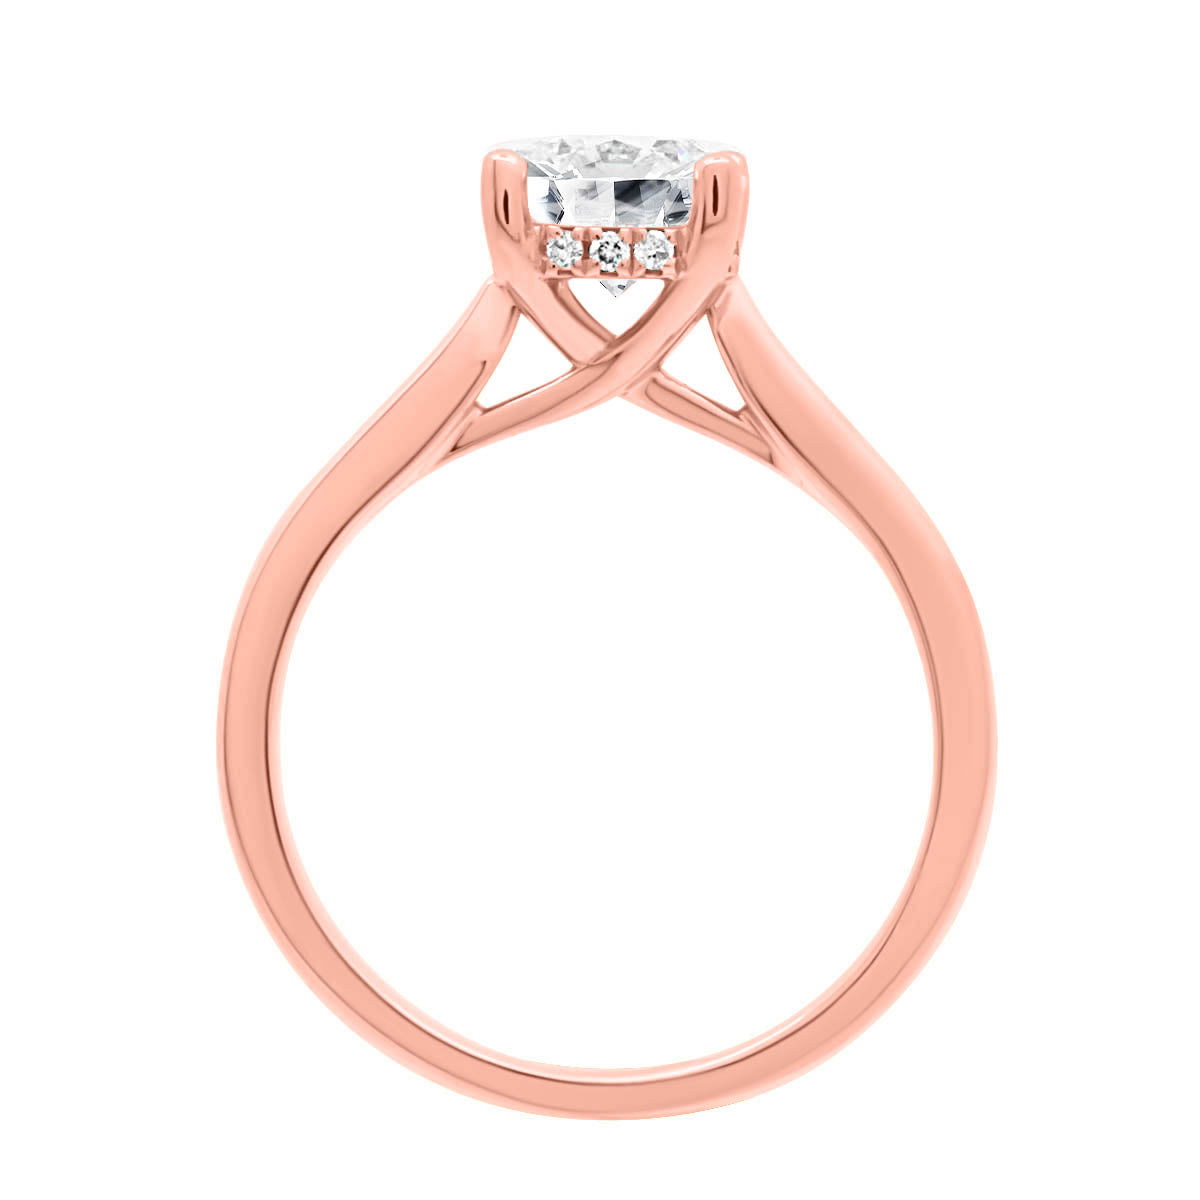 Hidden Halo Solitaire Engagement Ring in rose gold and upright position